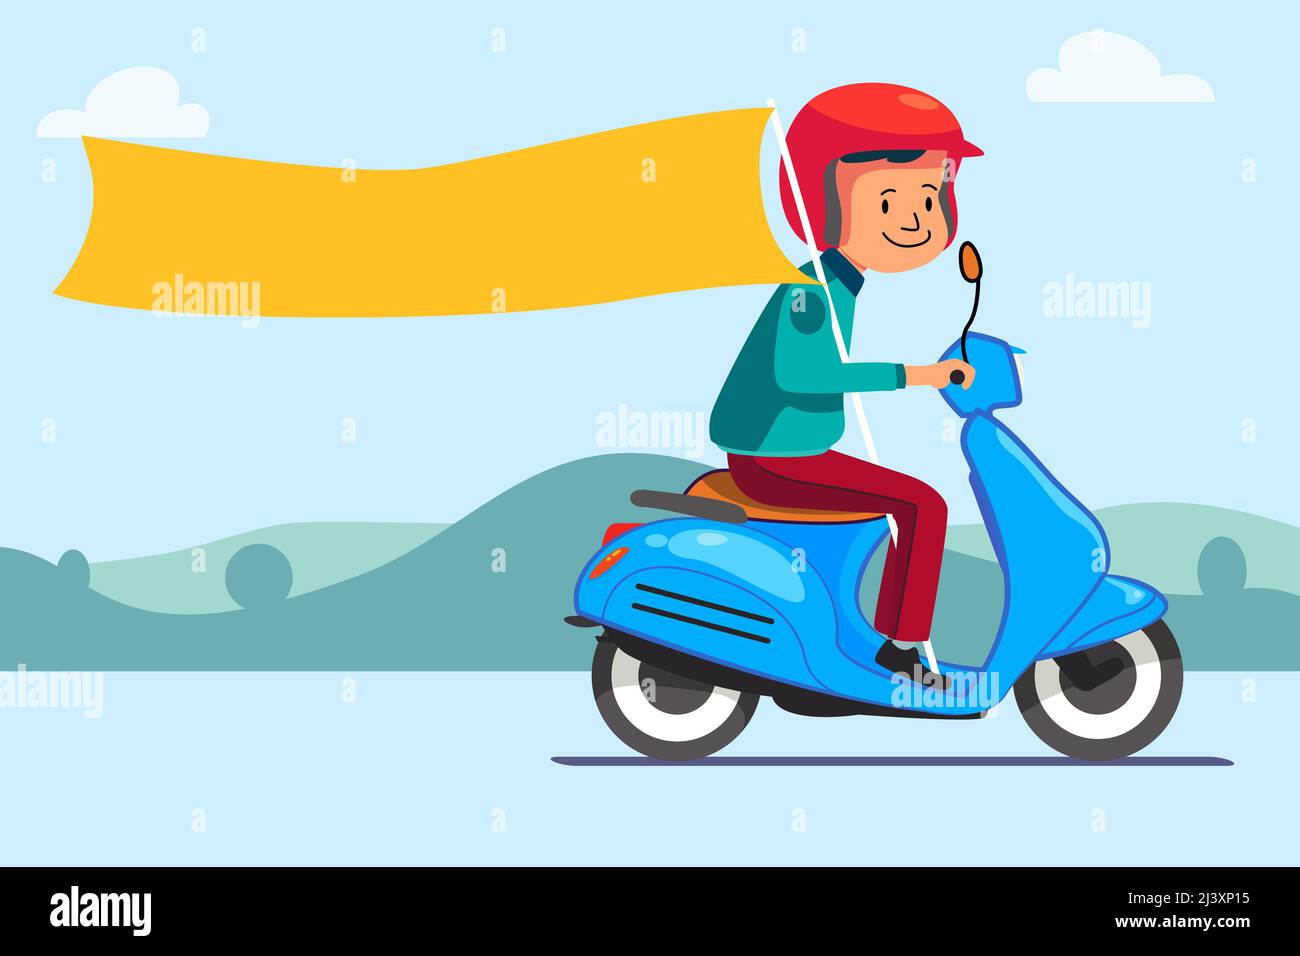 A vector illustration of Scooter Rider Carrying Blank Banner Cartoon Stock Vector